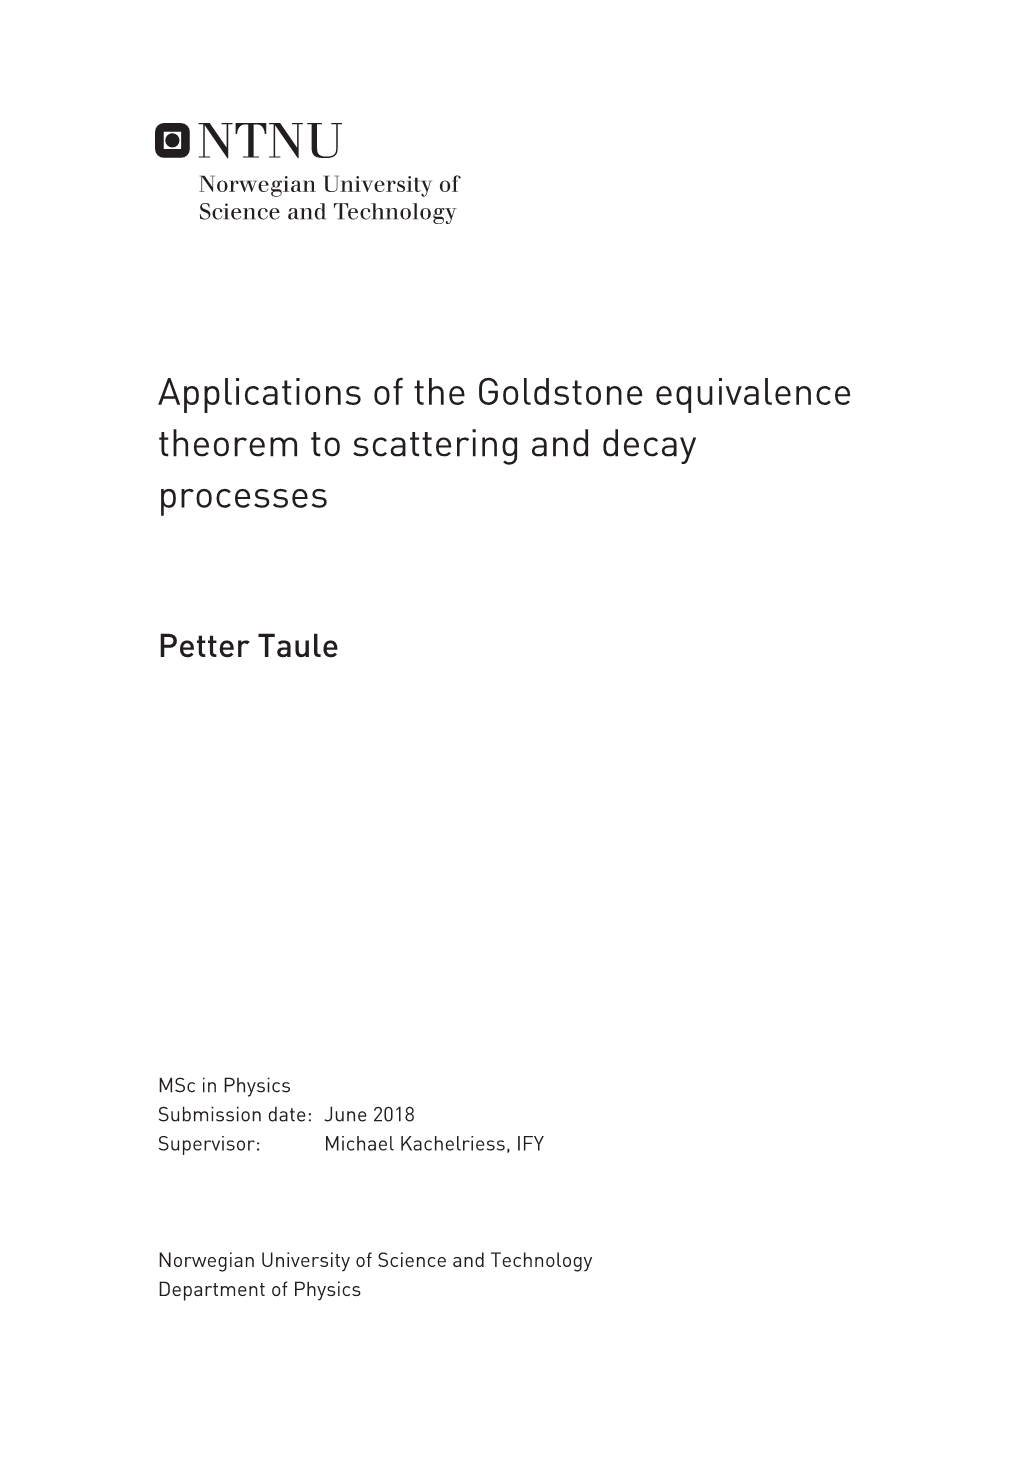 Applications of the Goldstone Equivalence Theorem to Scattering and Decay Processes